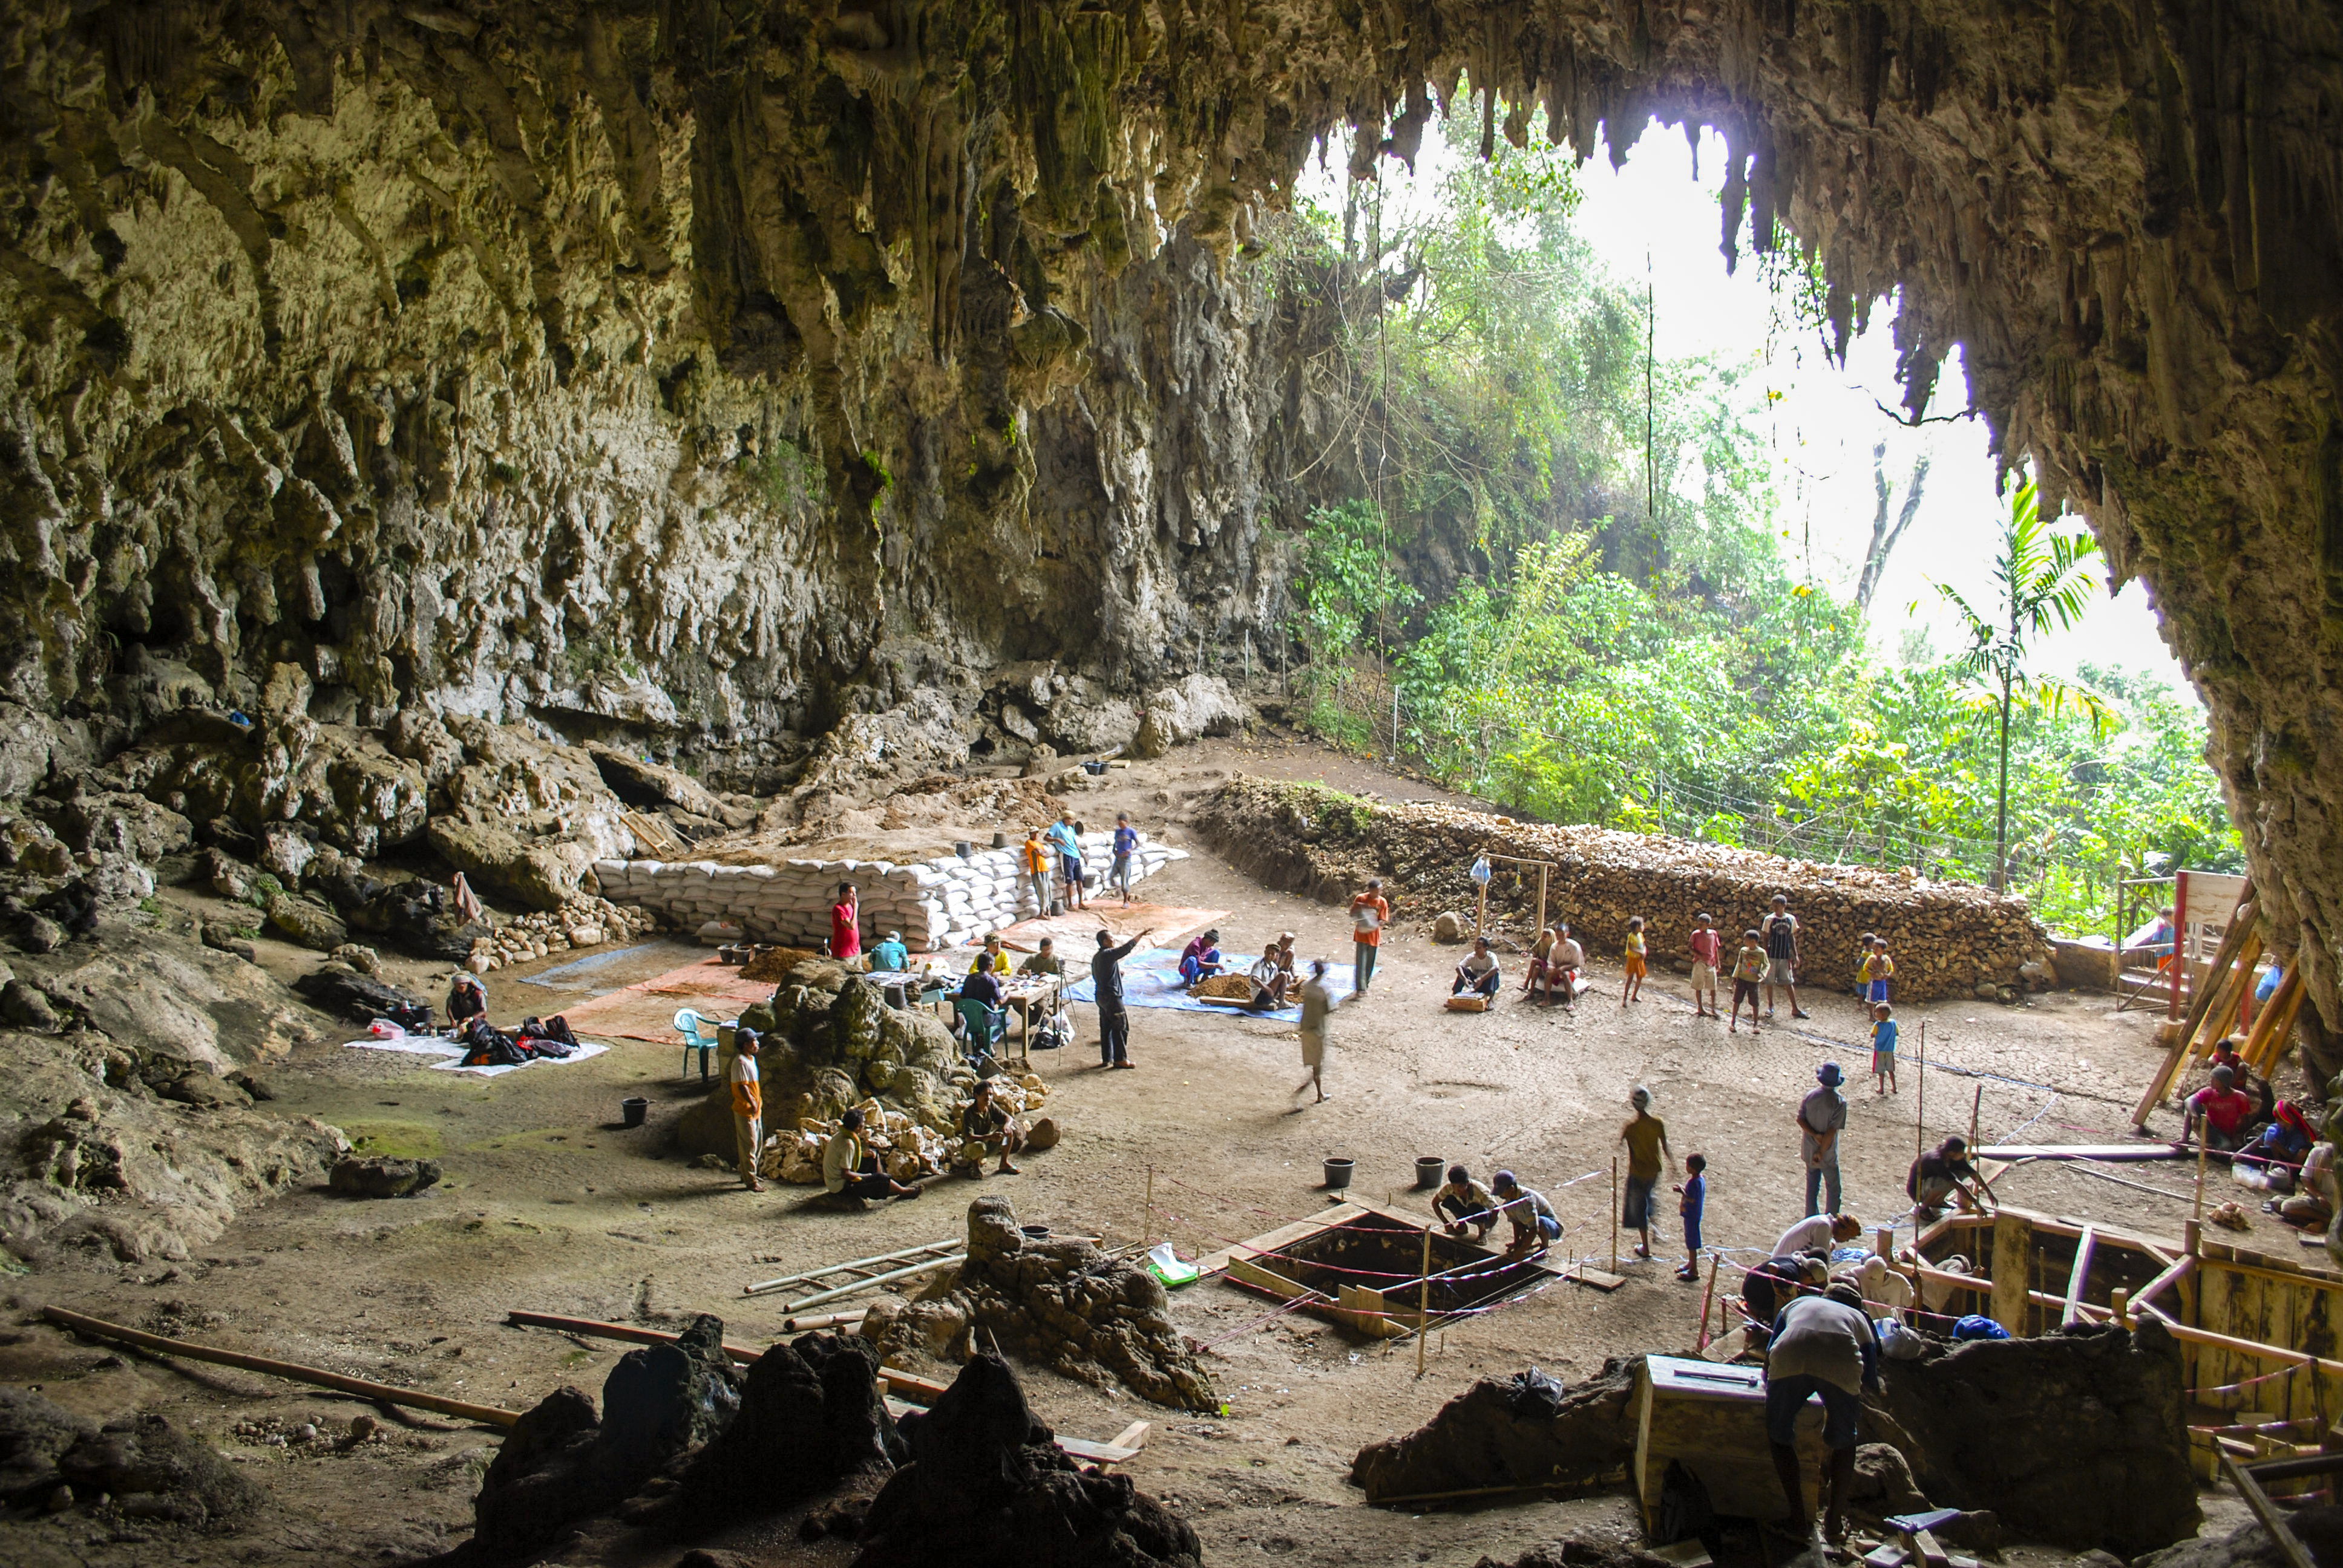 Liang Bua, a limestone cave on the Indonesian island of Flores. The Liang Bua team prepares for new archaeological excavations. Eight years of further excavations and study at the Indonesian cave site of Liang Bua have pushed back the time of disappearance of the ‘hobbits’ of Flores (Homo floresiensis) from as recently as 12,000 years ago to about 50,000 years ago. (Liang Bua Team)